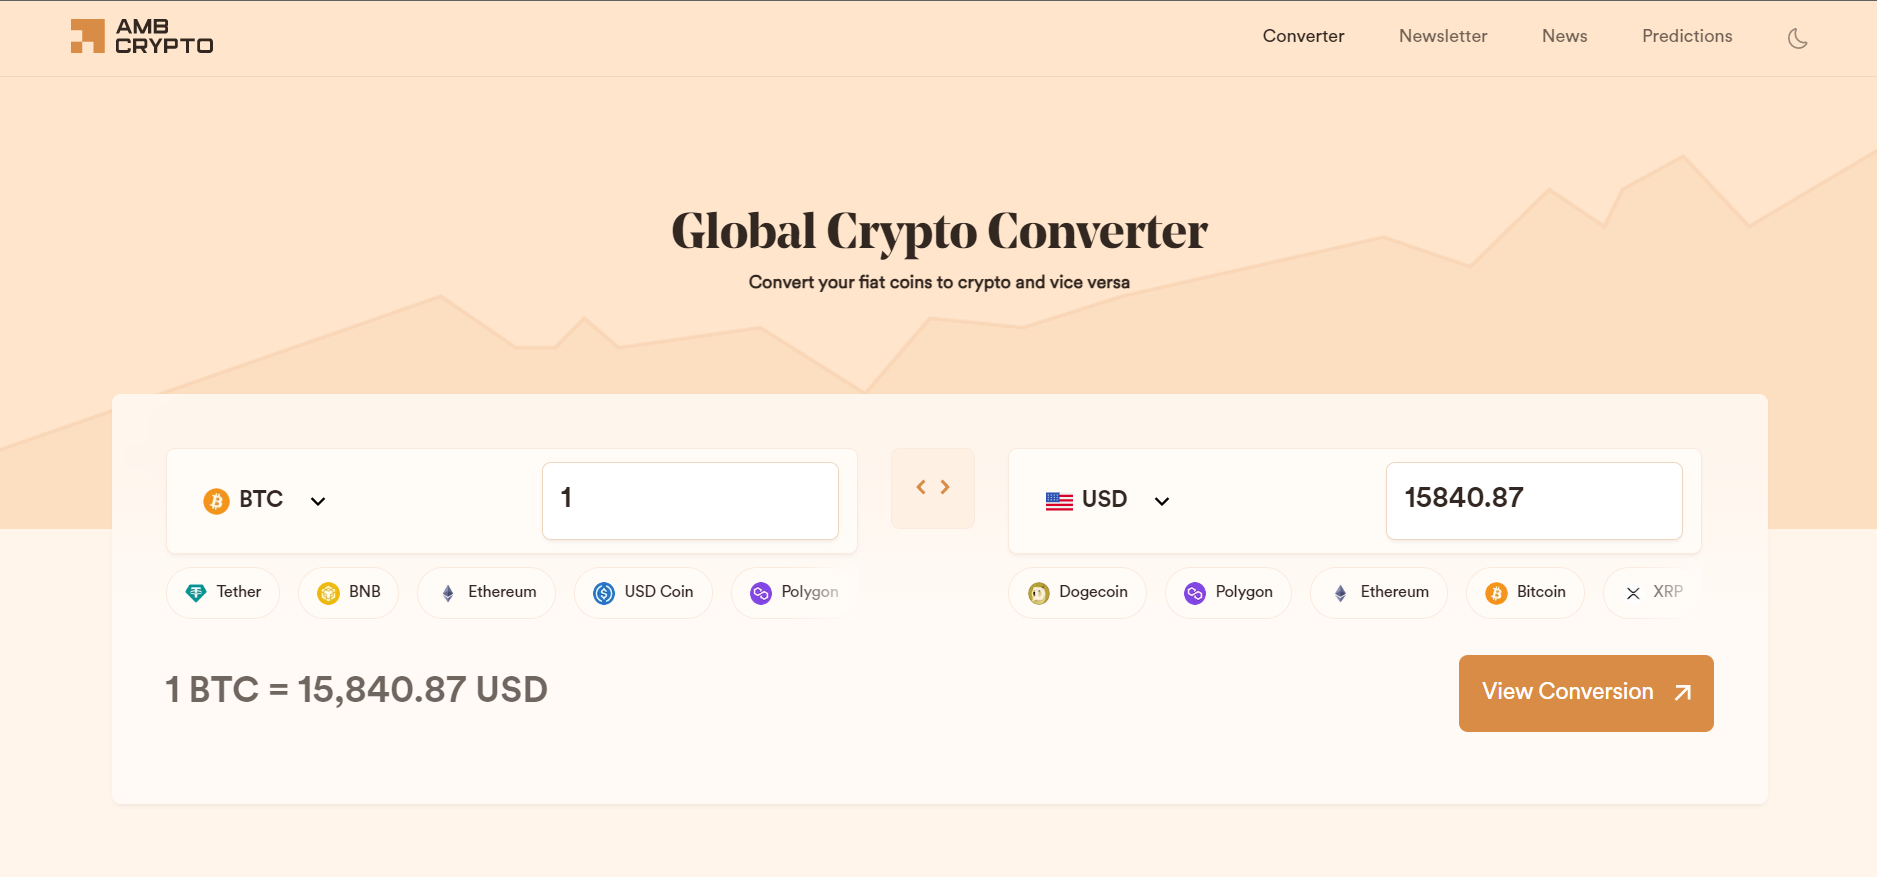 AMBCrypto launches its Global Crypto Converter